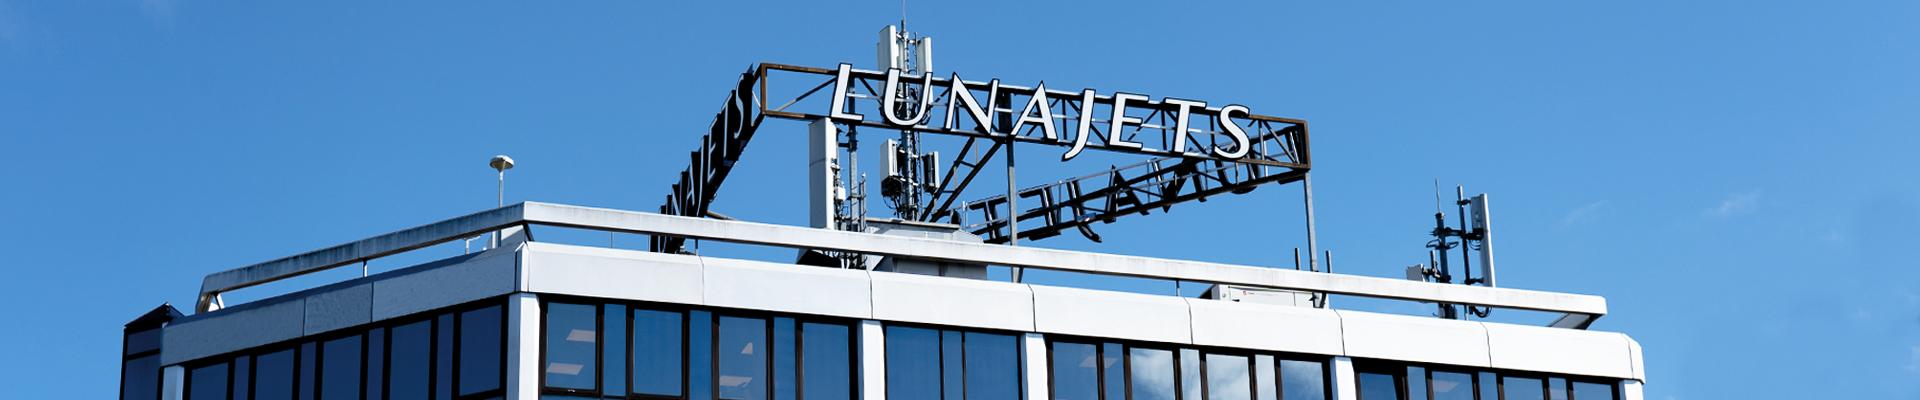 LunaJets headquarters with the sign of the company's logo on the roof by daylight